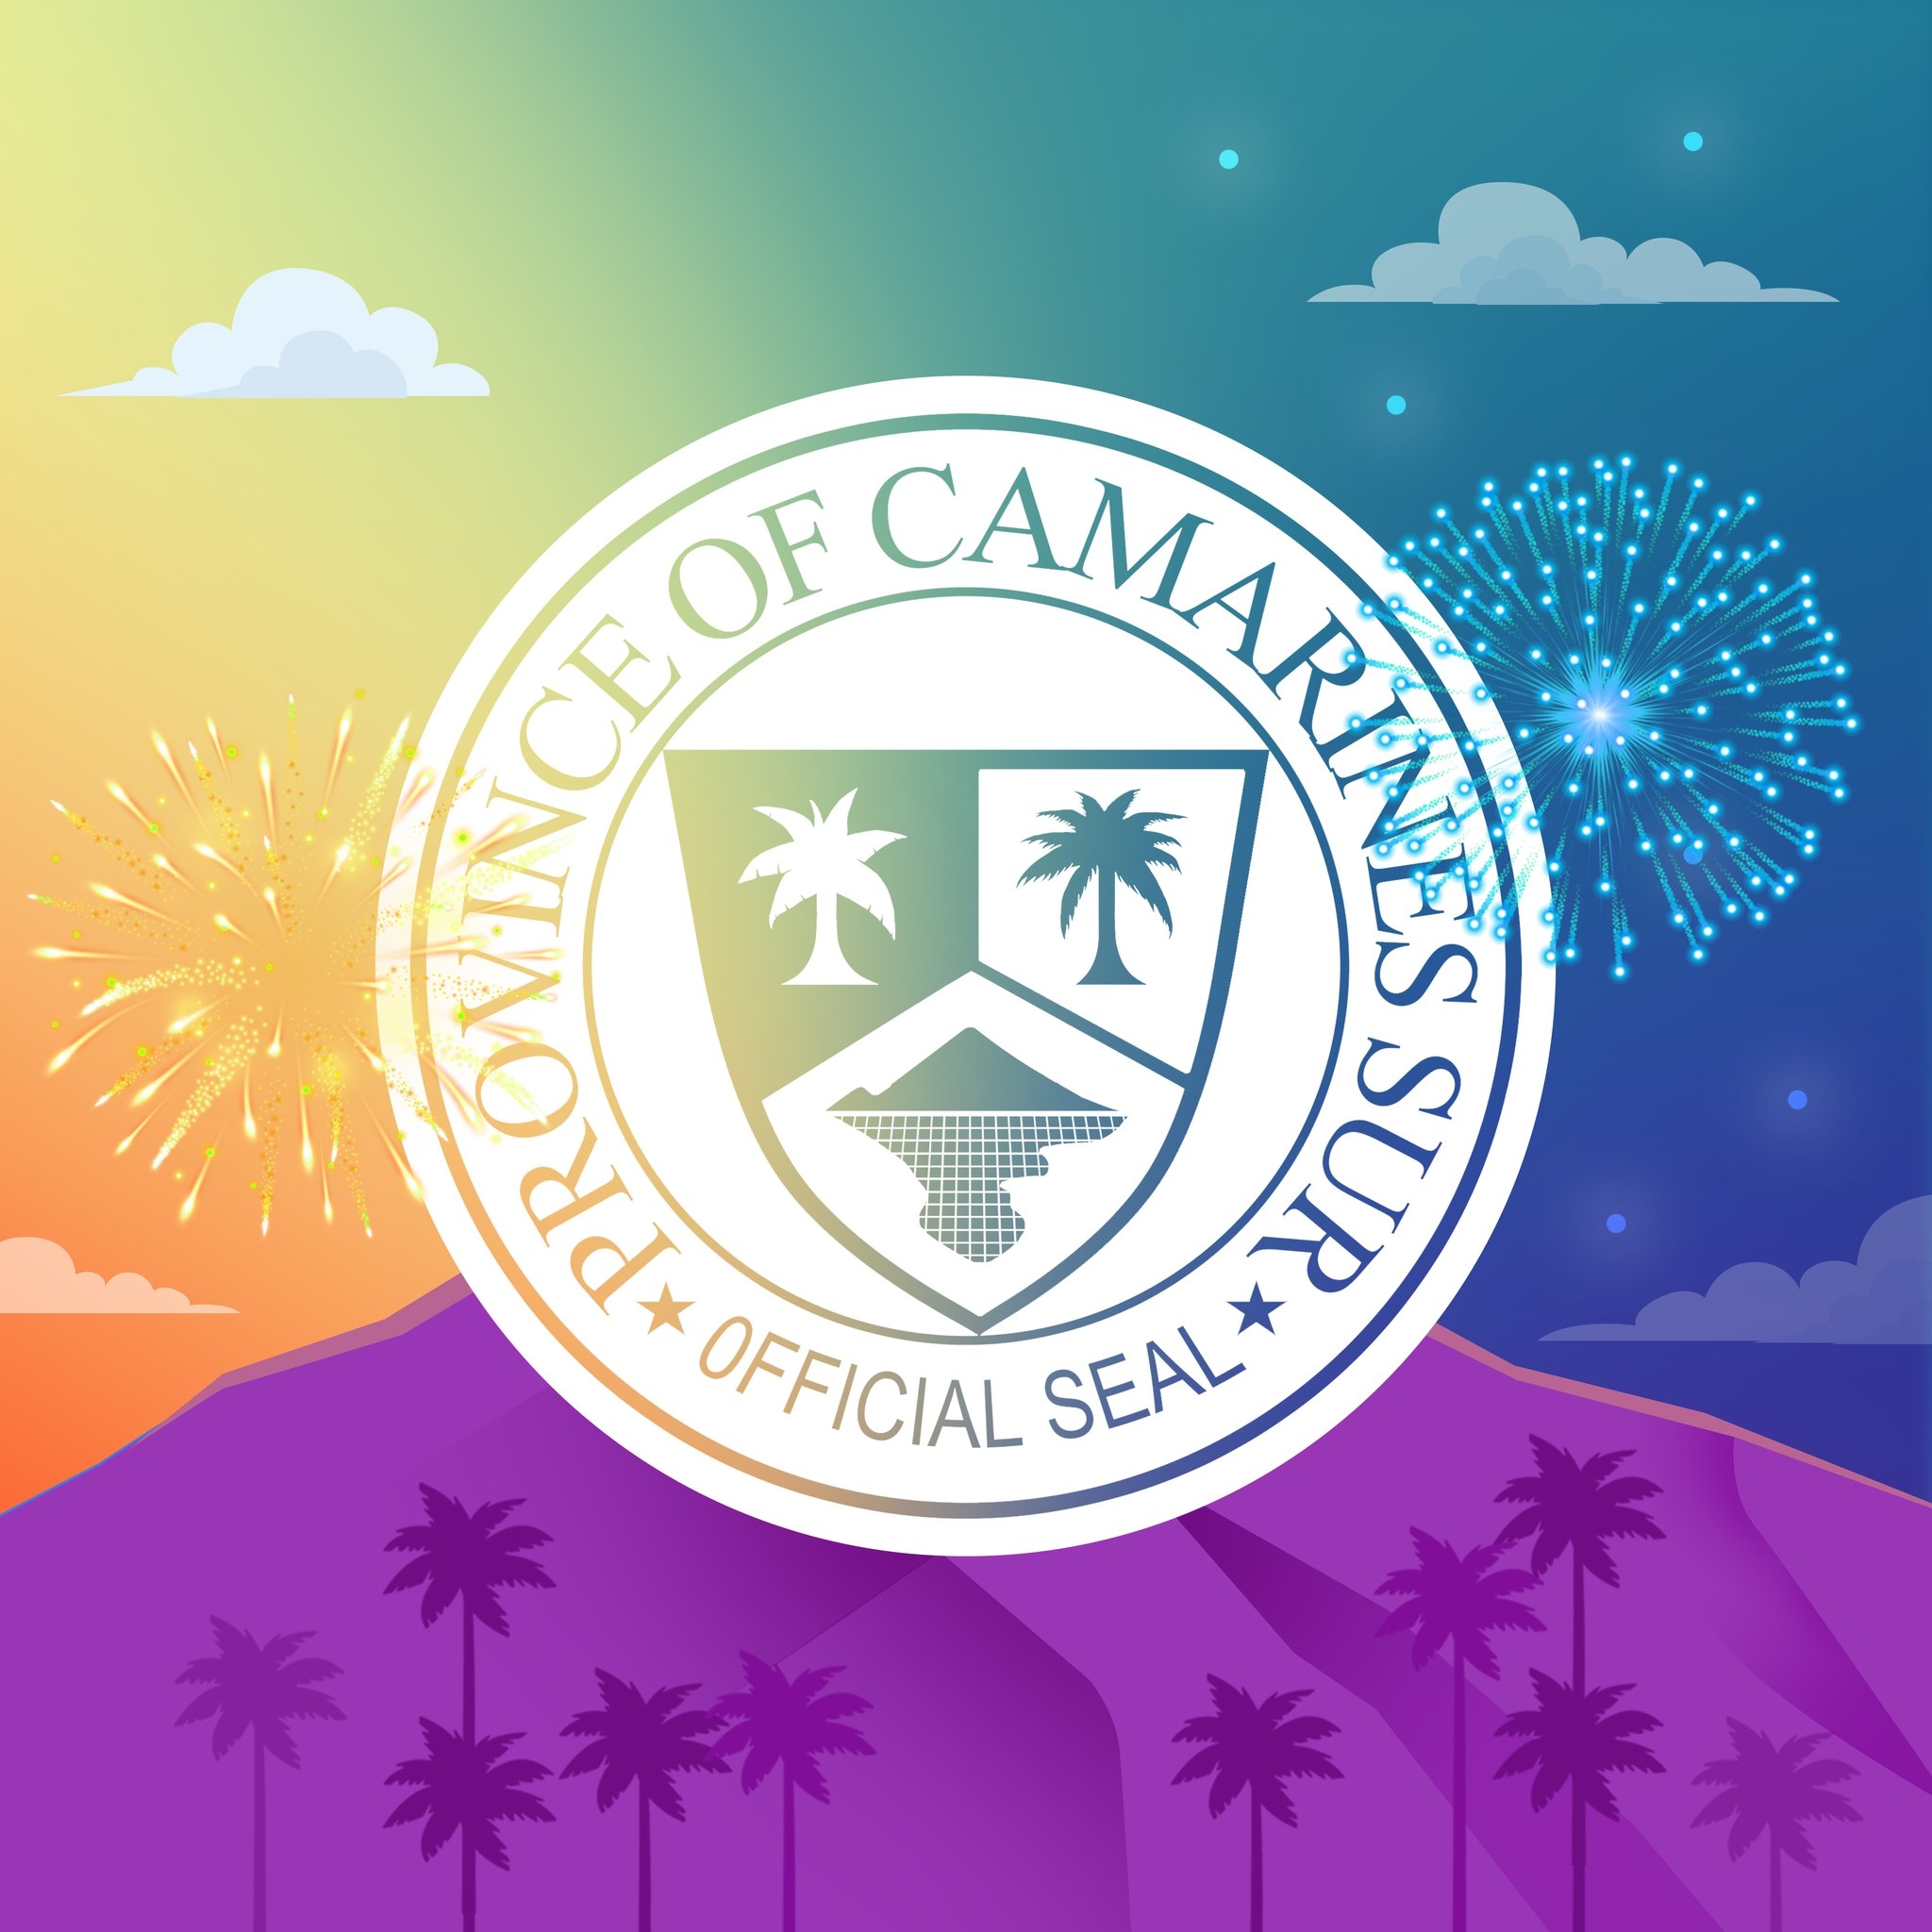 Province of CamSur Official FB Page